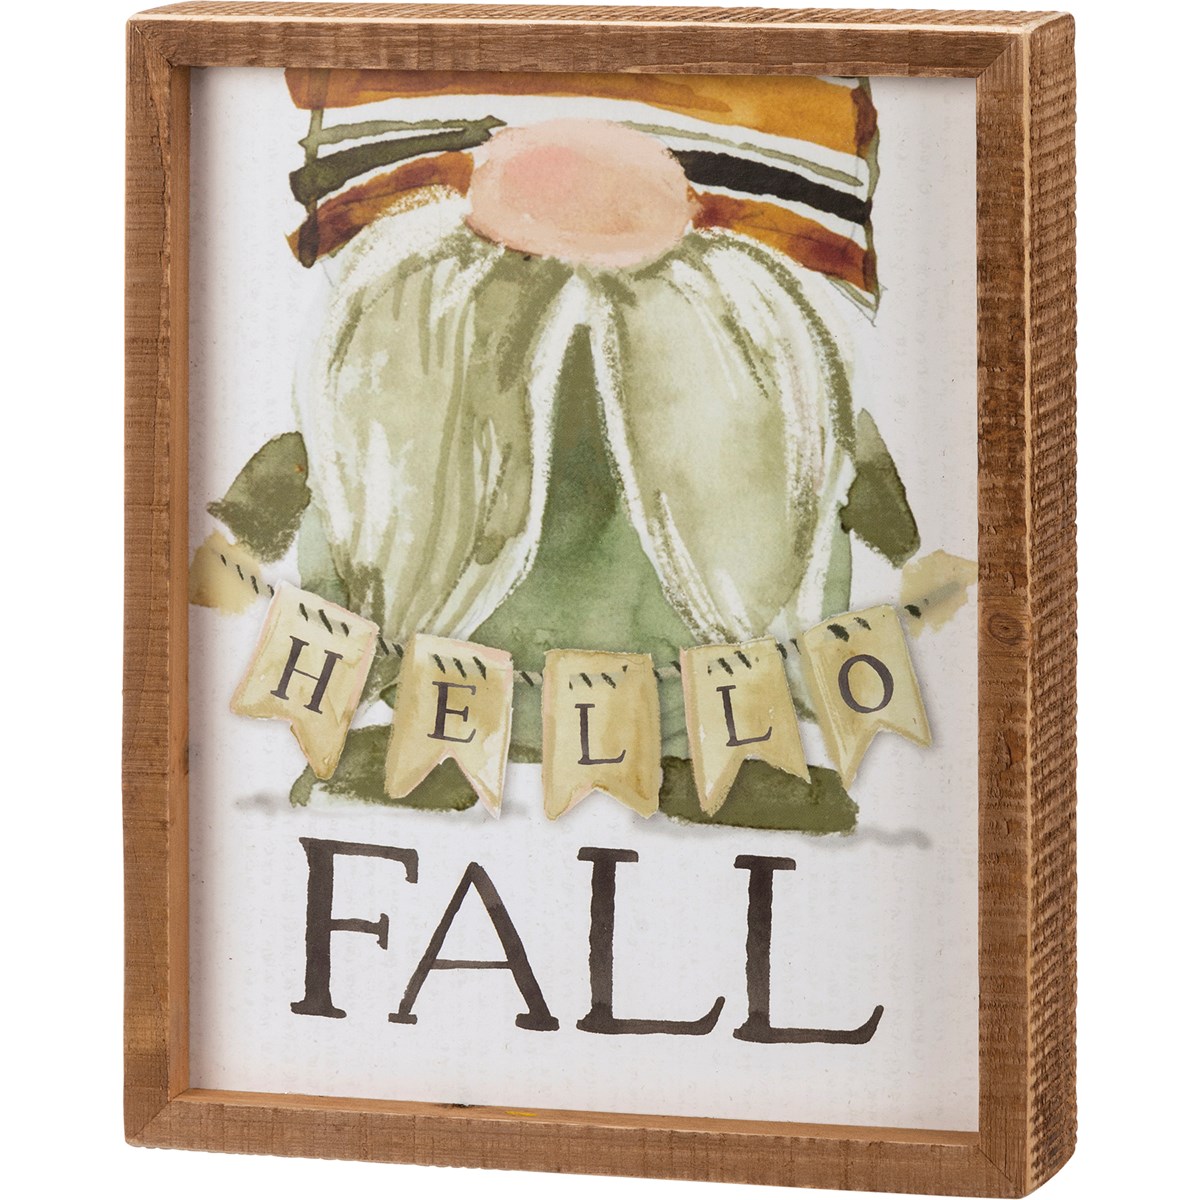 Hello Fall Gnome Inset Box Sign - Wood, Paper